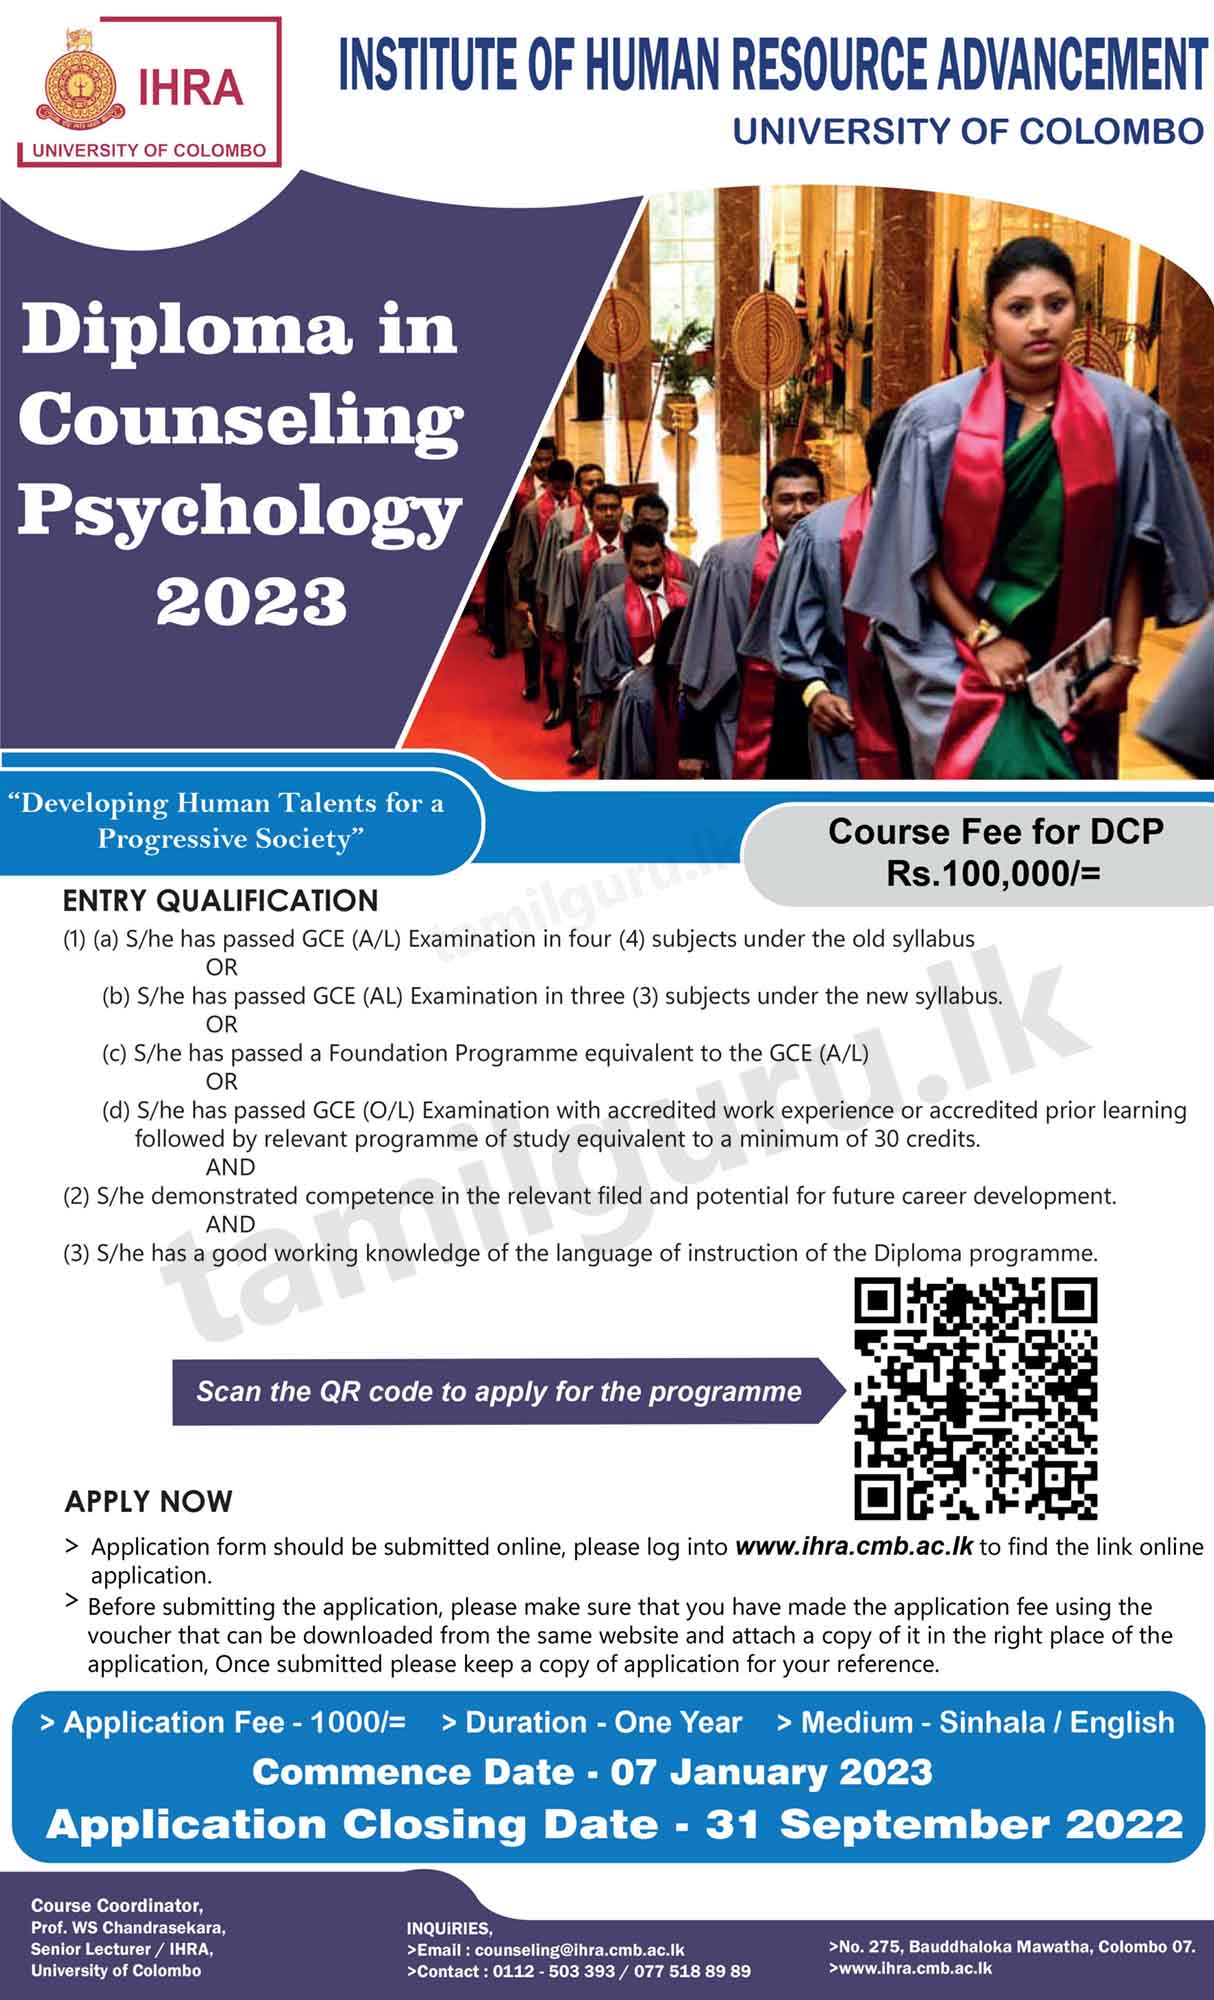 Diploma in Counseling Psychology (DCP) Course 2022 (2023 Intake) - University of Colombo, Institute of Human Resource Advancement (IHRA)